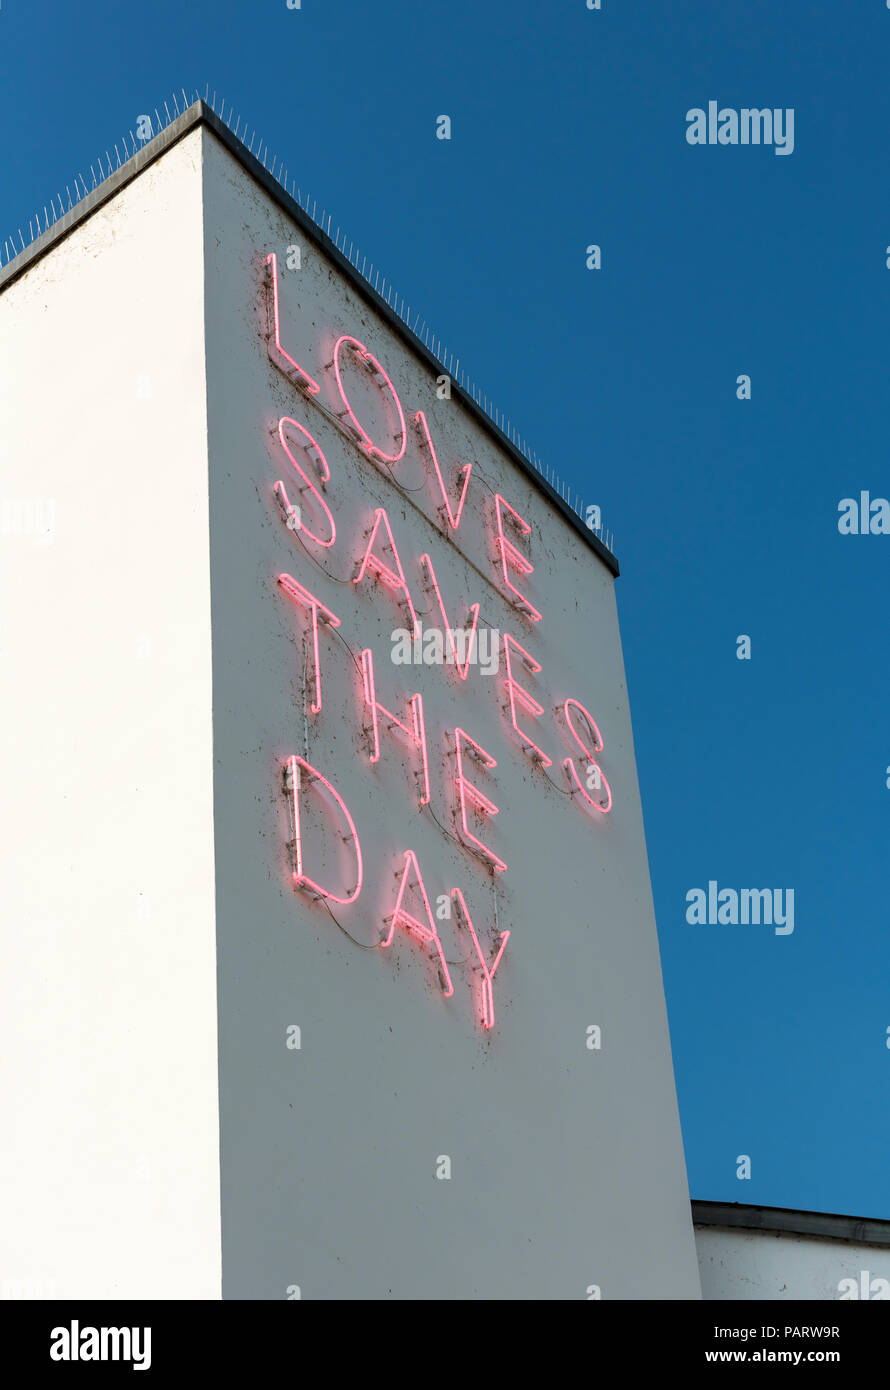 Neon sign Loves Save the Day on facade of Vitra Design Museum building in Weil am Rhein, Germany Stock Photo